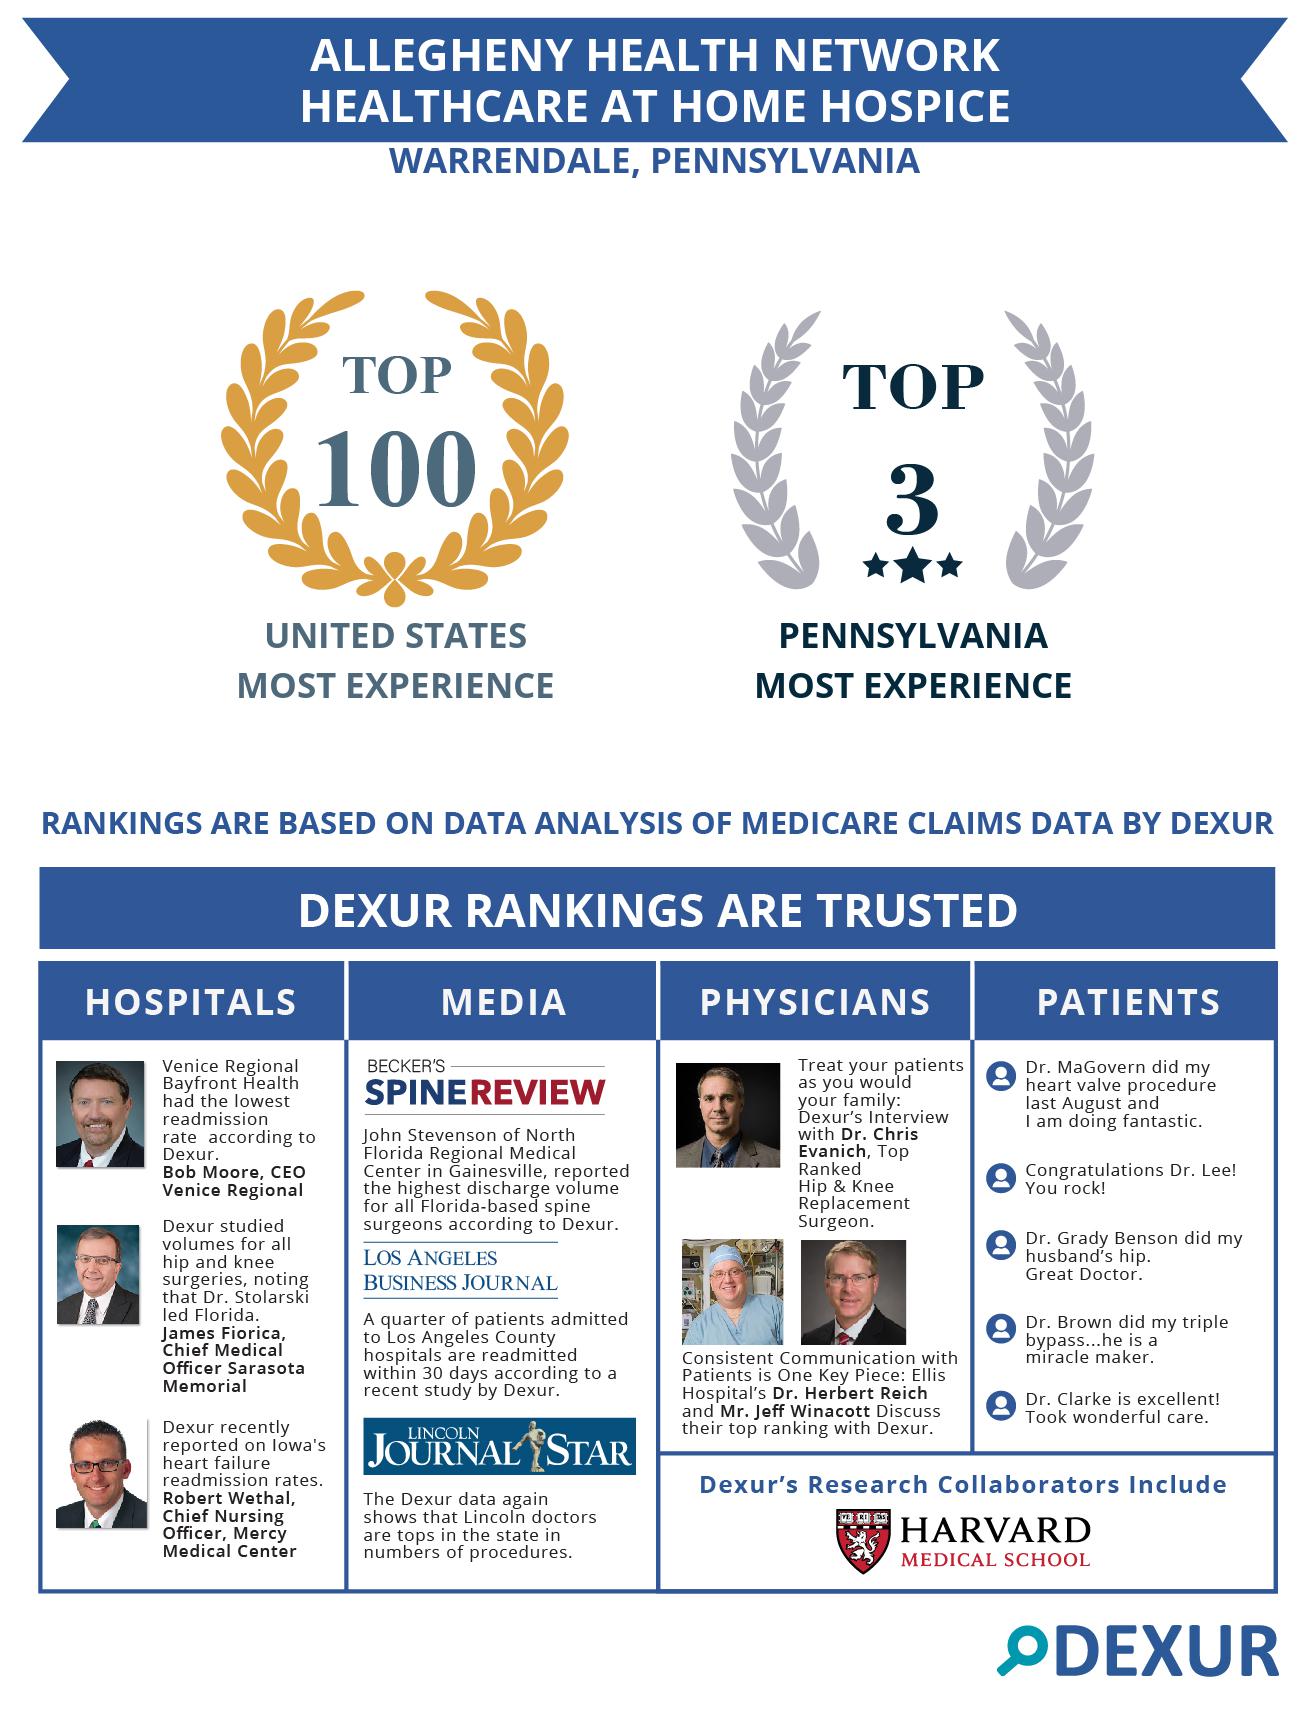 Allegheny Health Network Healthcare at Home Hospice Ranking